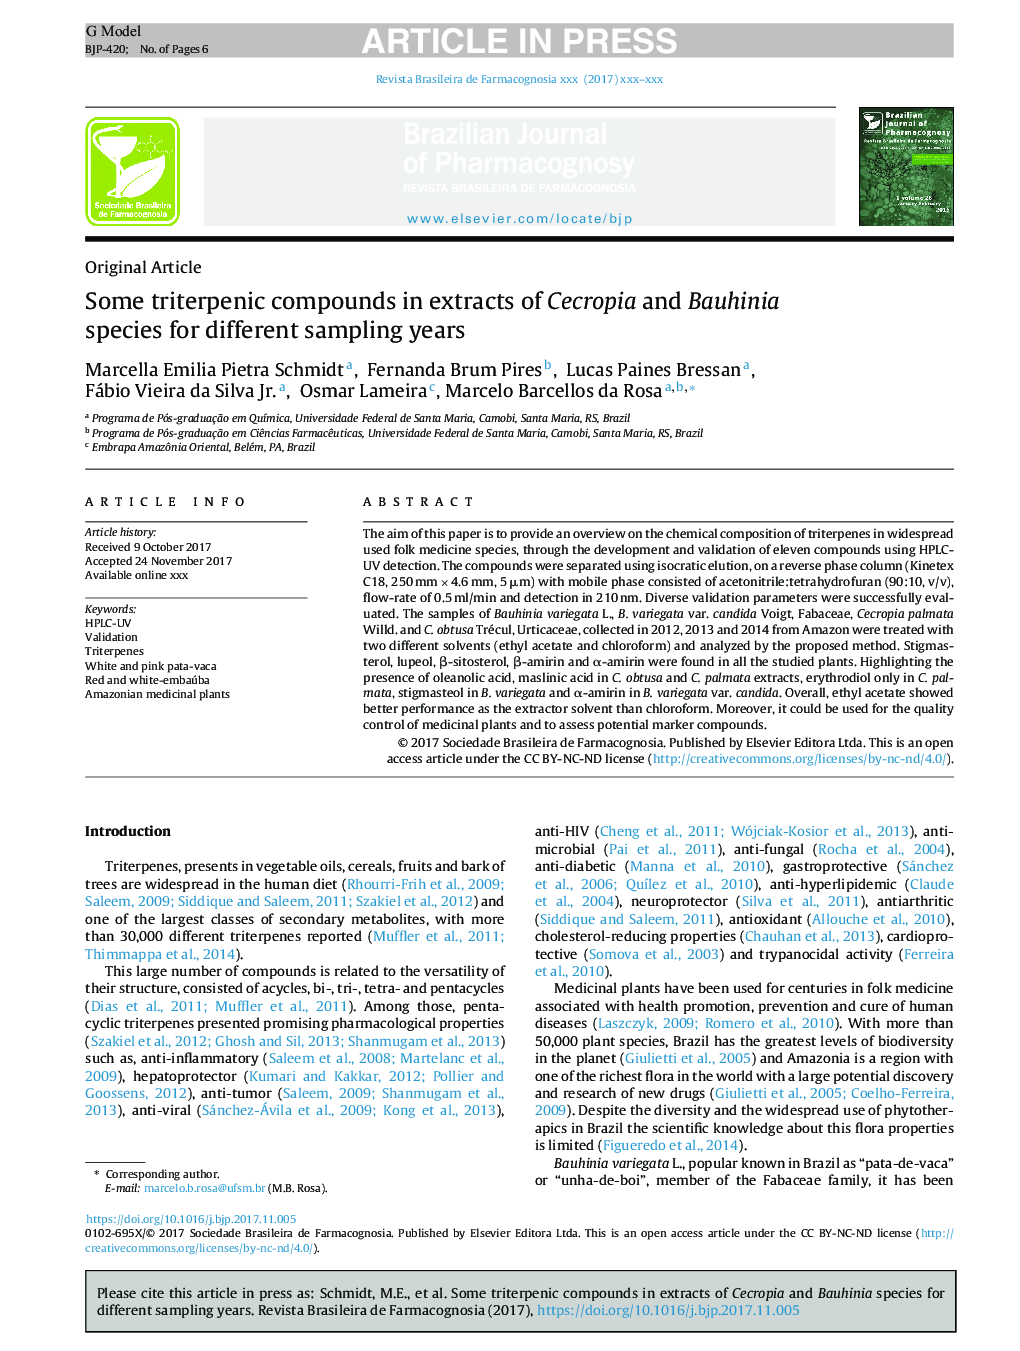 Some triterpenic compounds in extracts of Cecropia and Bauhinia species for different sampling years